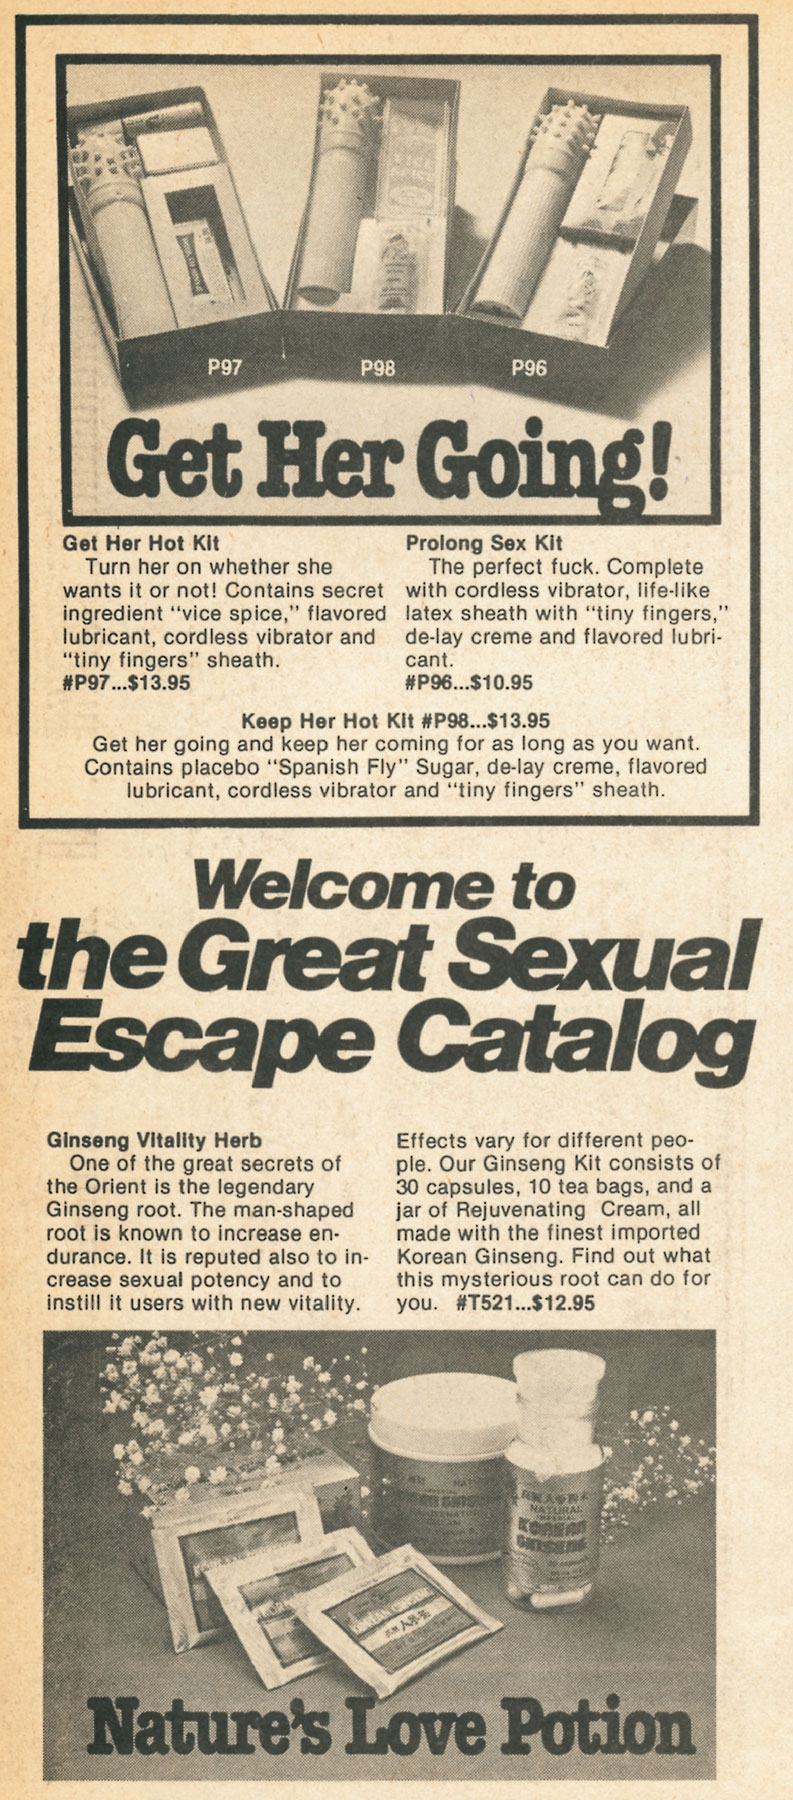 A magazine advertisement featuring various sex toys and ginseng vitality herb for improving sexual potency.